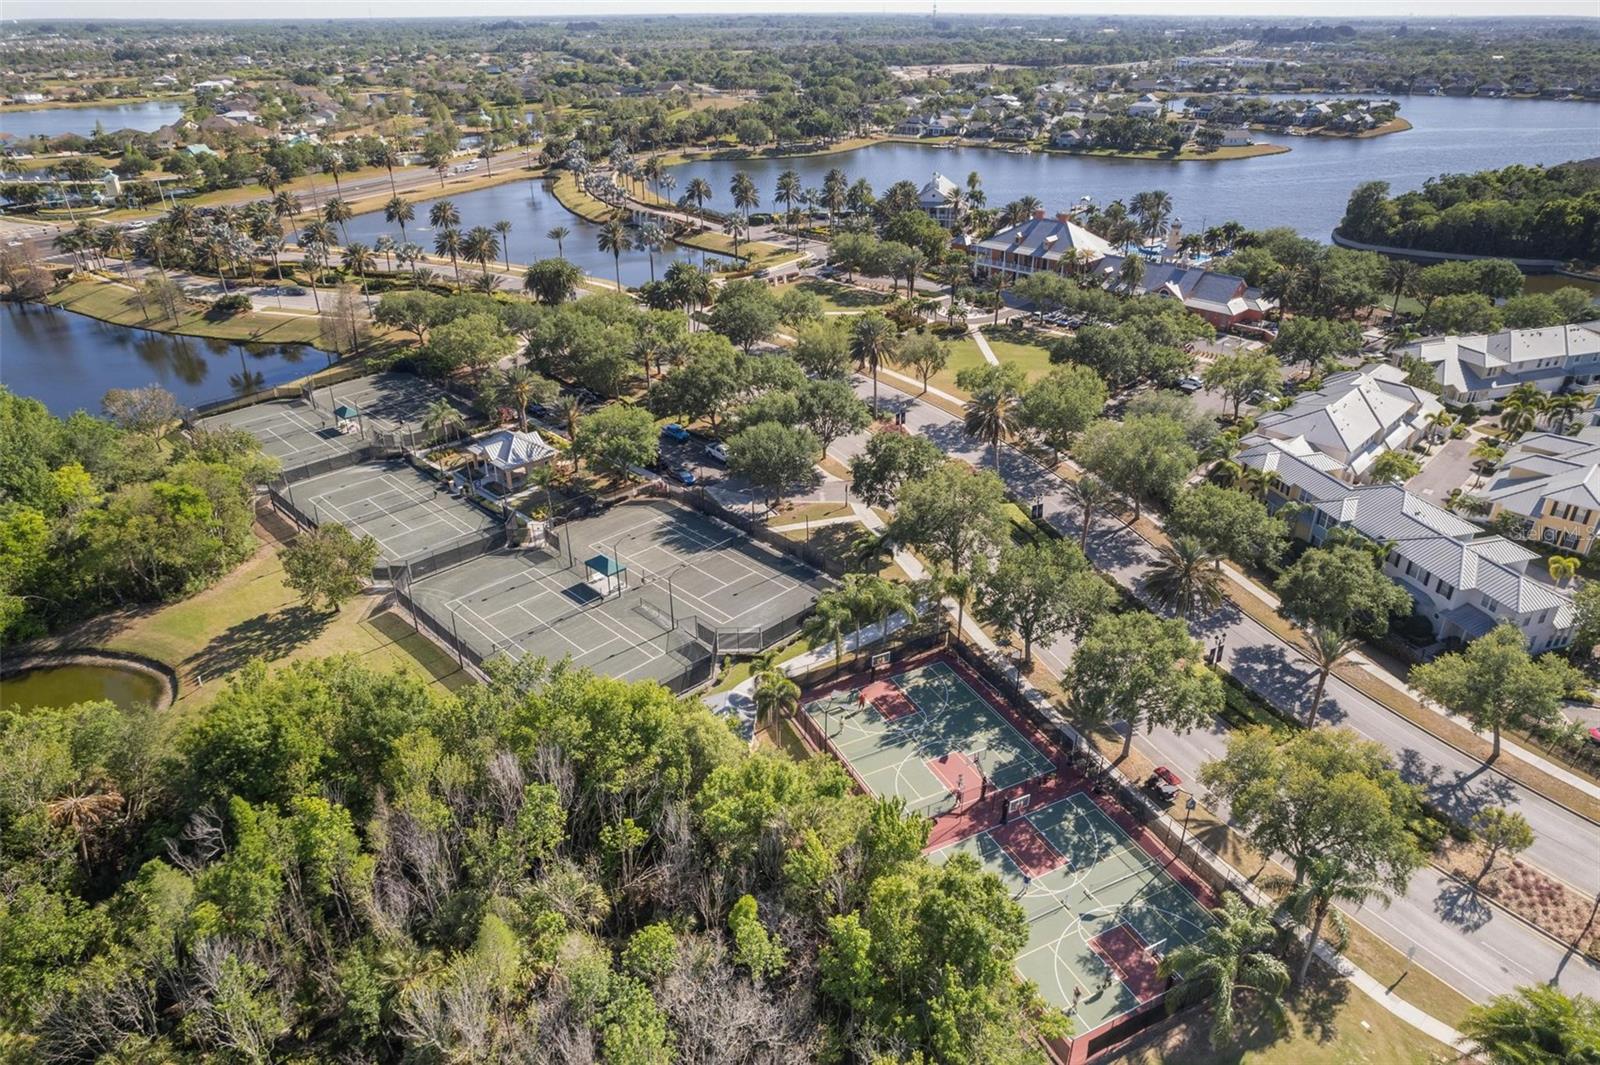 Basketball/ tennis courts aerial